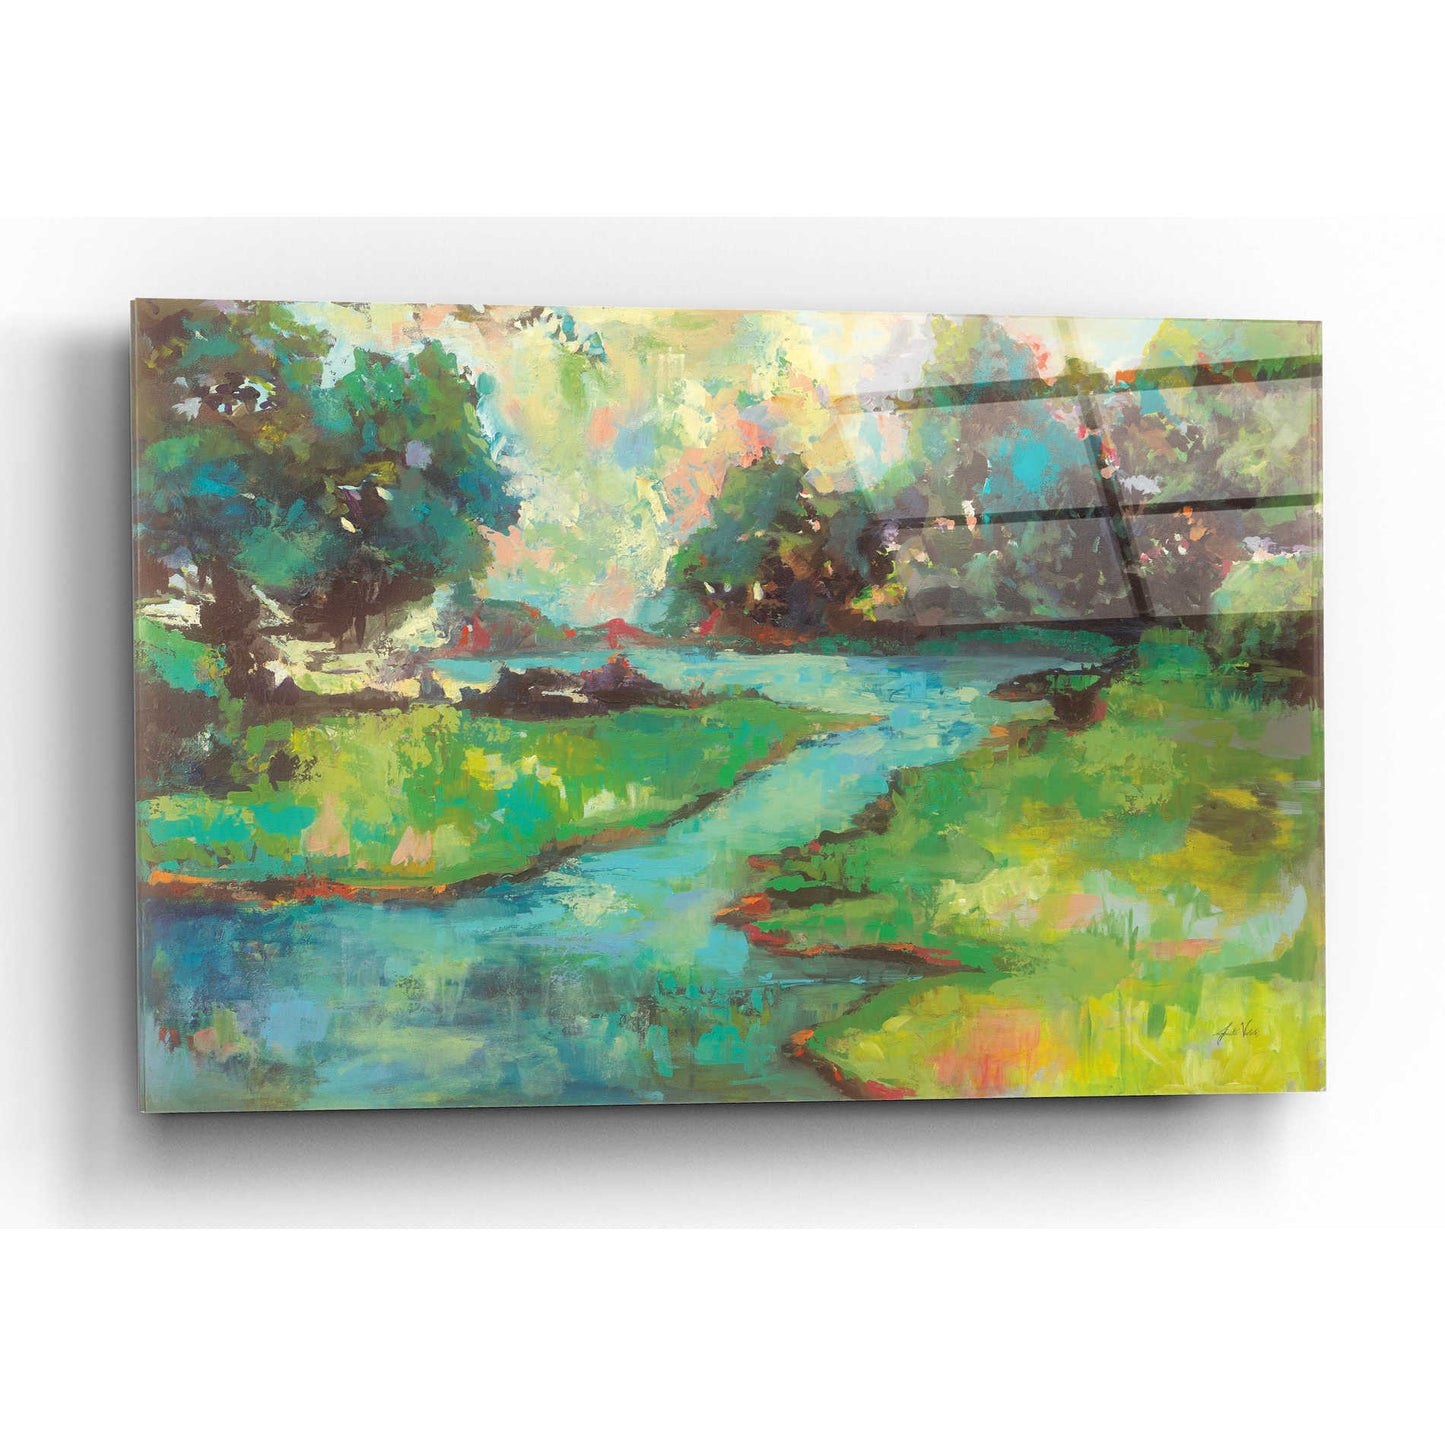 Epic Art 'Landscape in the Park' by Jeanette Vertentes, Acrylic Glass Wall Art,24x16